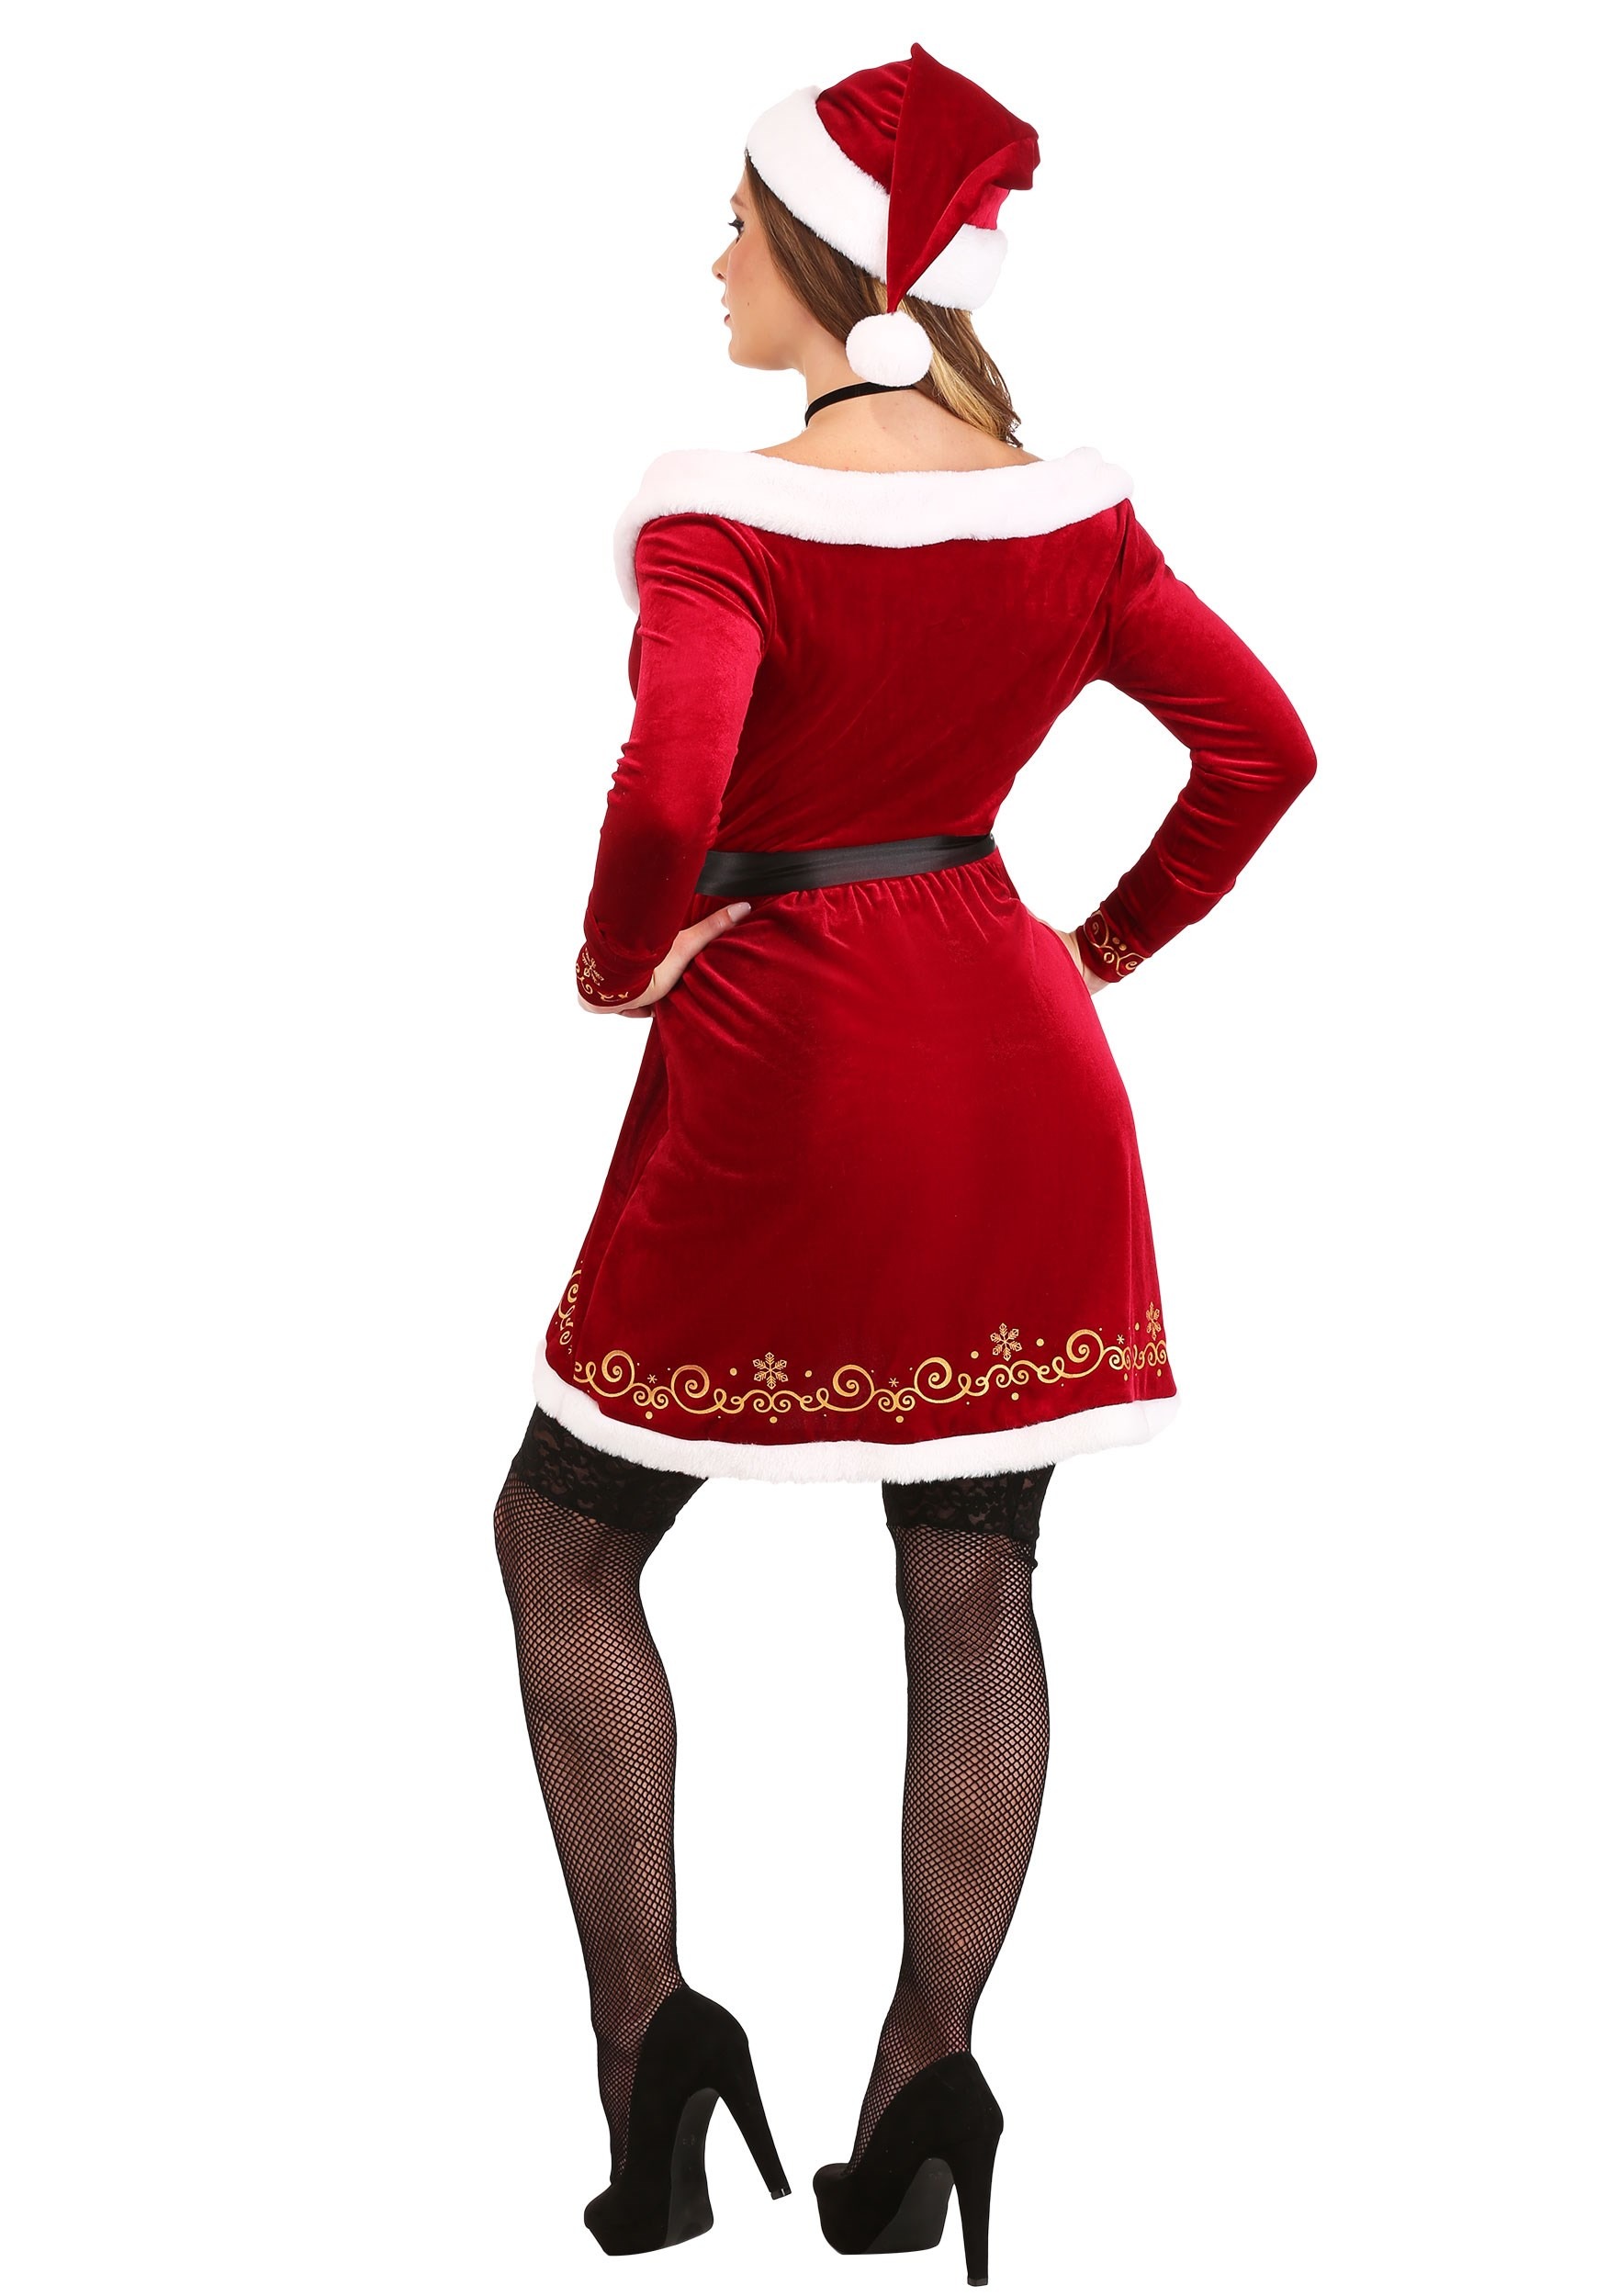 Sexy Mrs. Claus Fancy Dress Costume For Women